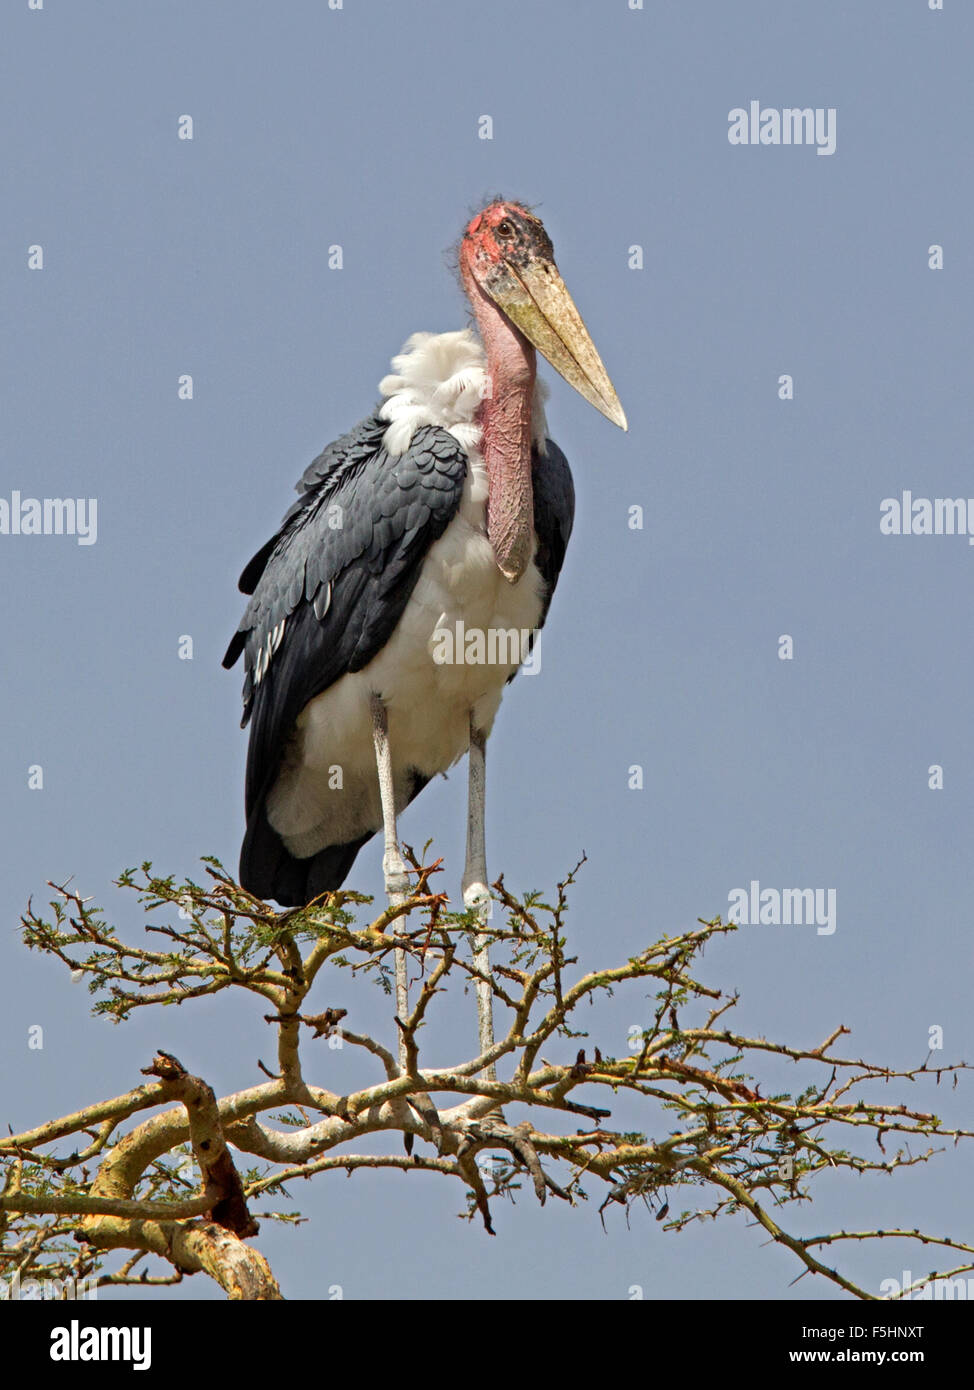 Marabou stork perched on tree top Stock Photo